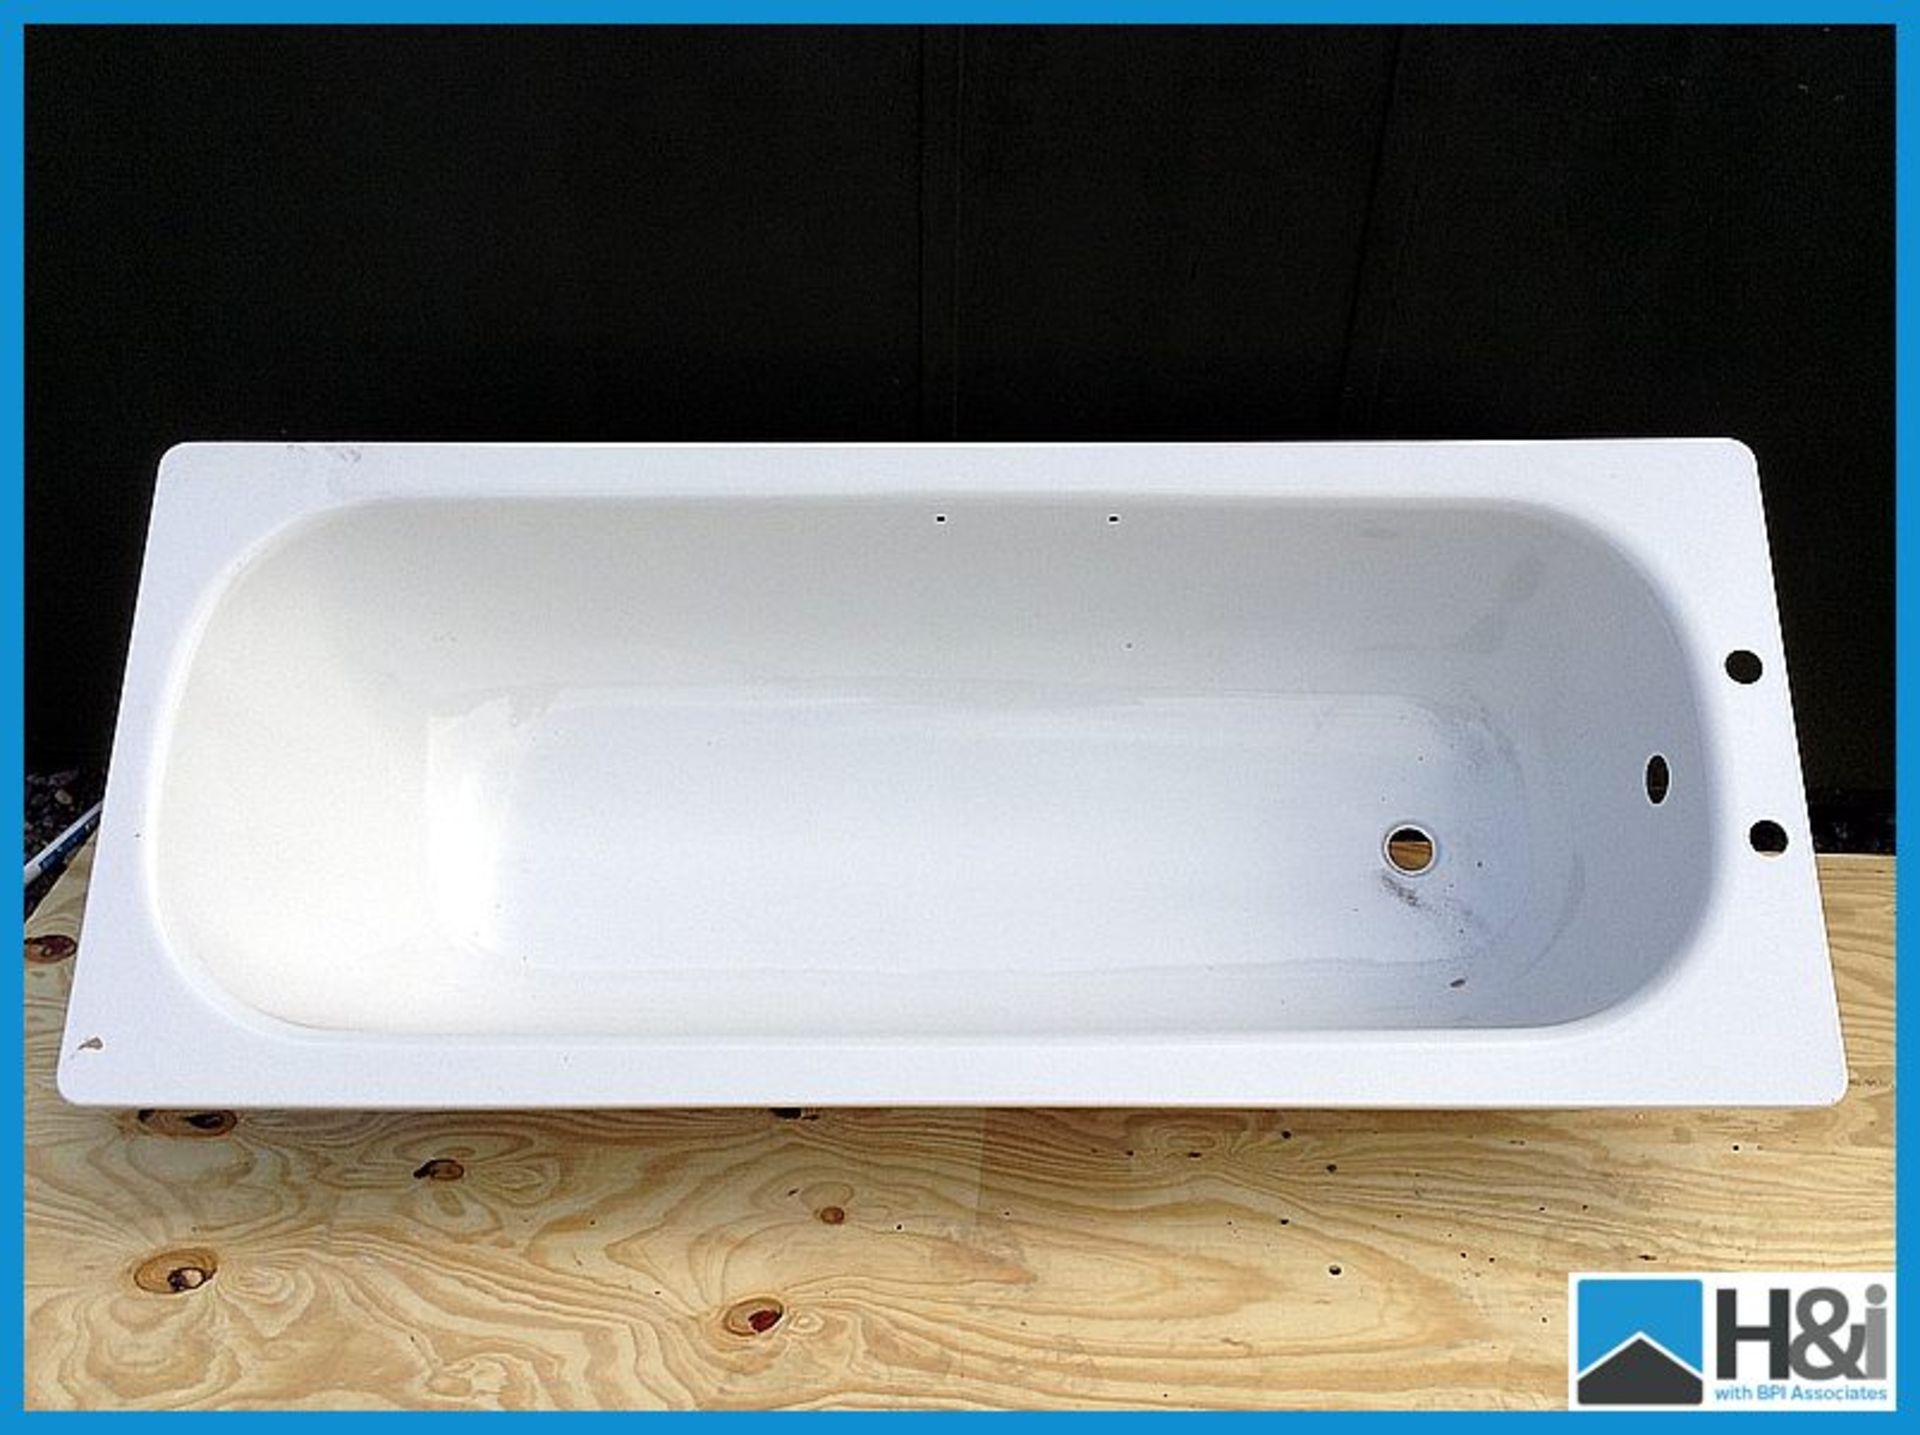 Tin White Bath with No Grip 1700mm x 700mm Normal Price 170.00 Appraisal: Good Serial No: NA